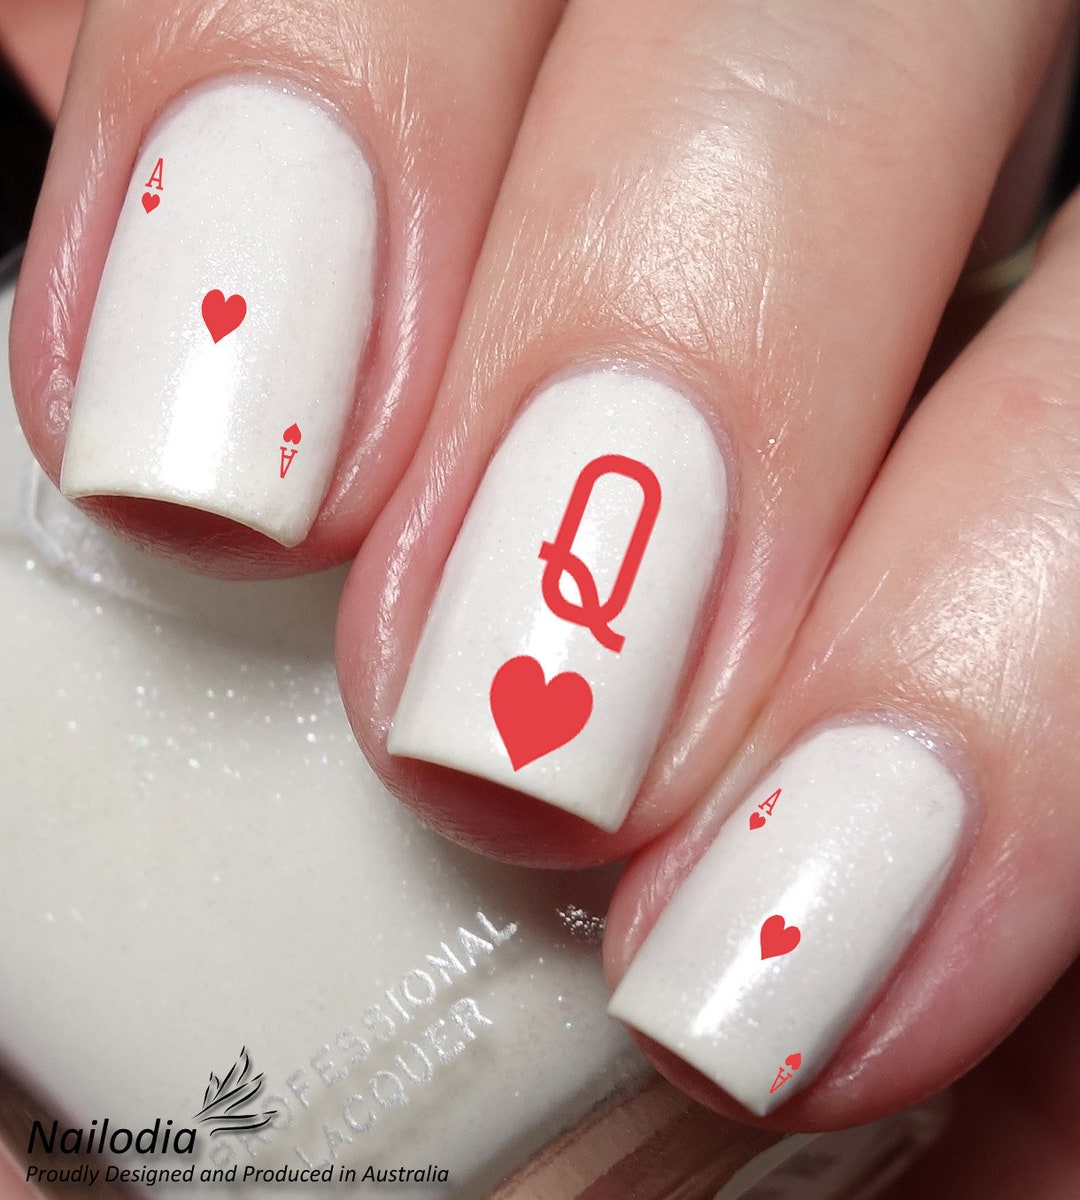 King Queen Jack & Ace of Heart Nail Art Decal Sticker - Etsy